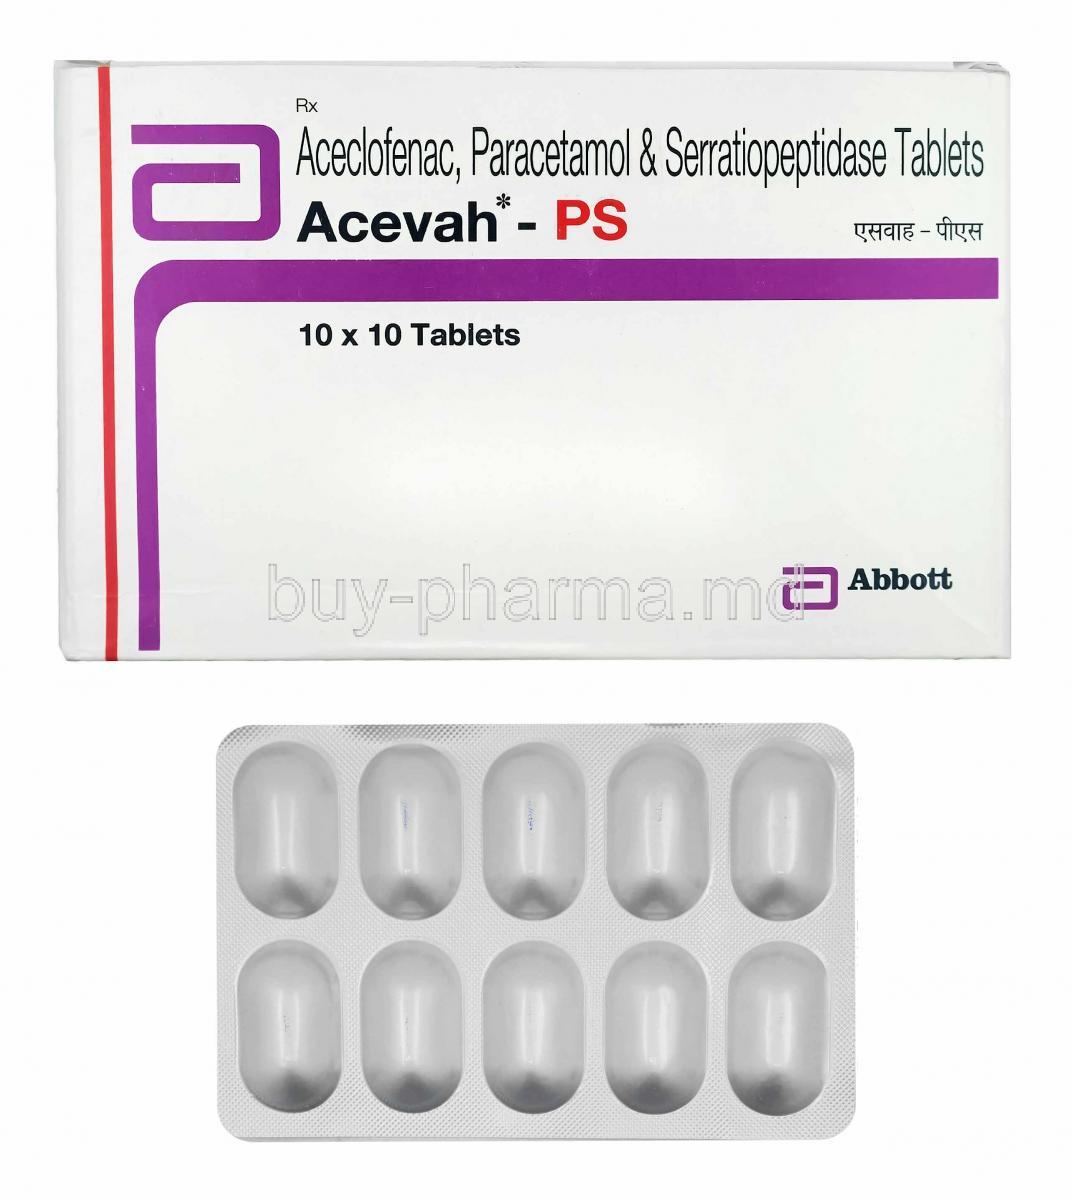 Acevah-PS box and tablets